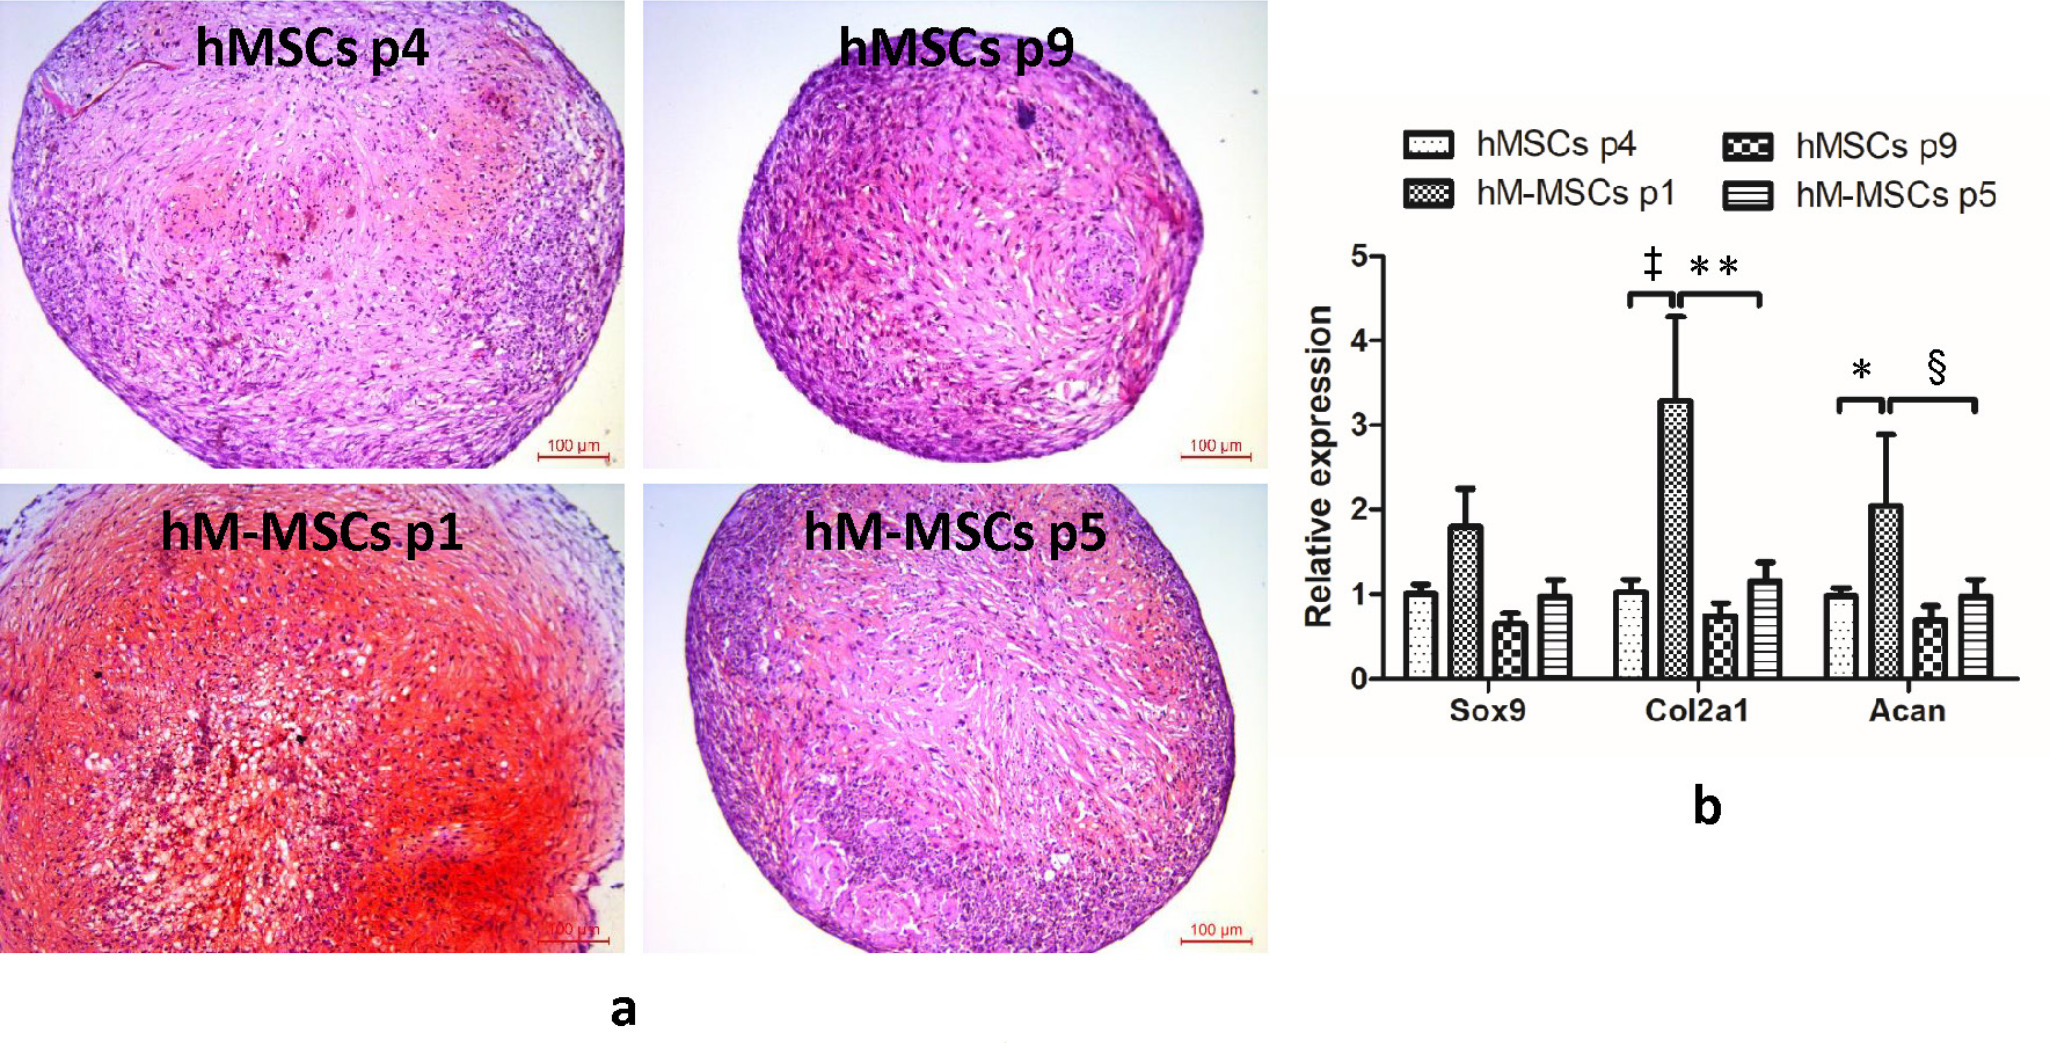 Fig. 2 
            Chondrogenic differentiation capacity of manipulated human mesenchymal stem cells (hM-MSCs) (passage 1 or 5) and their untreated human mesenchymal stem cells (hMSCs) controls (passage 4 or passage 9). a) Safranin O staining results of hM-MSCs or untreated hMSCs controls. b) Relative expression of chondrogenic differentiation markers including Sox9, Col2a1, and Aggrecan (Acan) in hM-MSCs or untreated hMSCs controls. The representative images shown were derived from the bone marrow of donor 1. The data are expressed as mean and SD (n = 2 donors with three replicates for each donor). *p < 0.05 , ‡p < 0.001 versus human mesenchymal stem cells (hMSCs) controls. §p < 0.05, **p < 0.001 versus hM-MSCs at passage 1 (hM-MSCs p1).
          